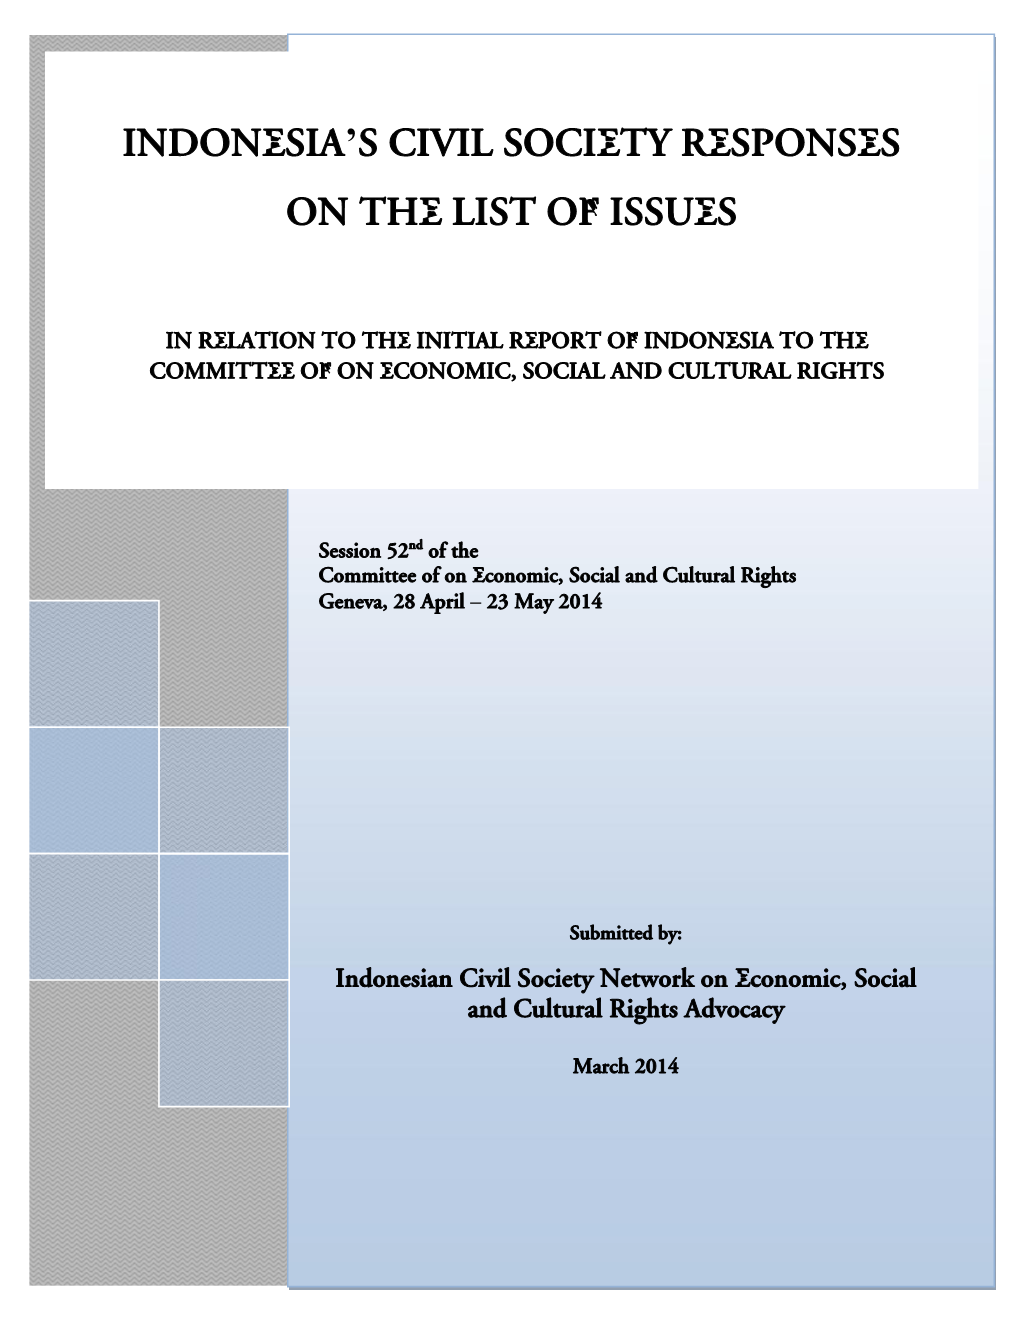 Indonesia's Civil Society Responses on the List Of